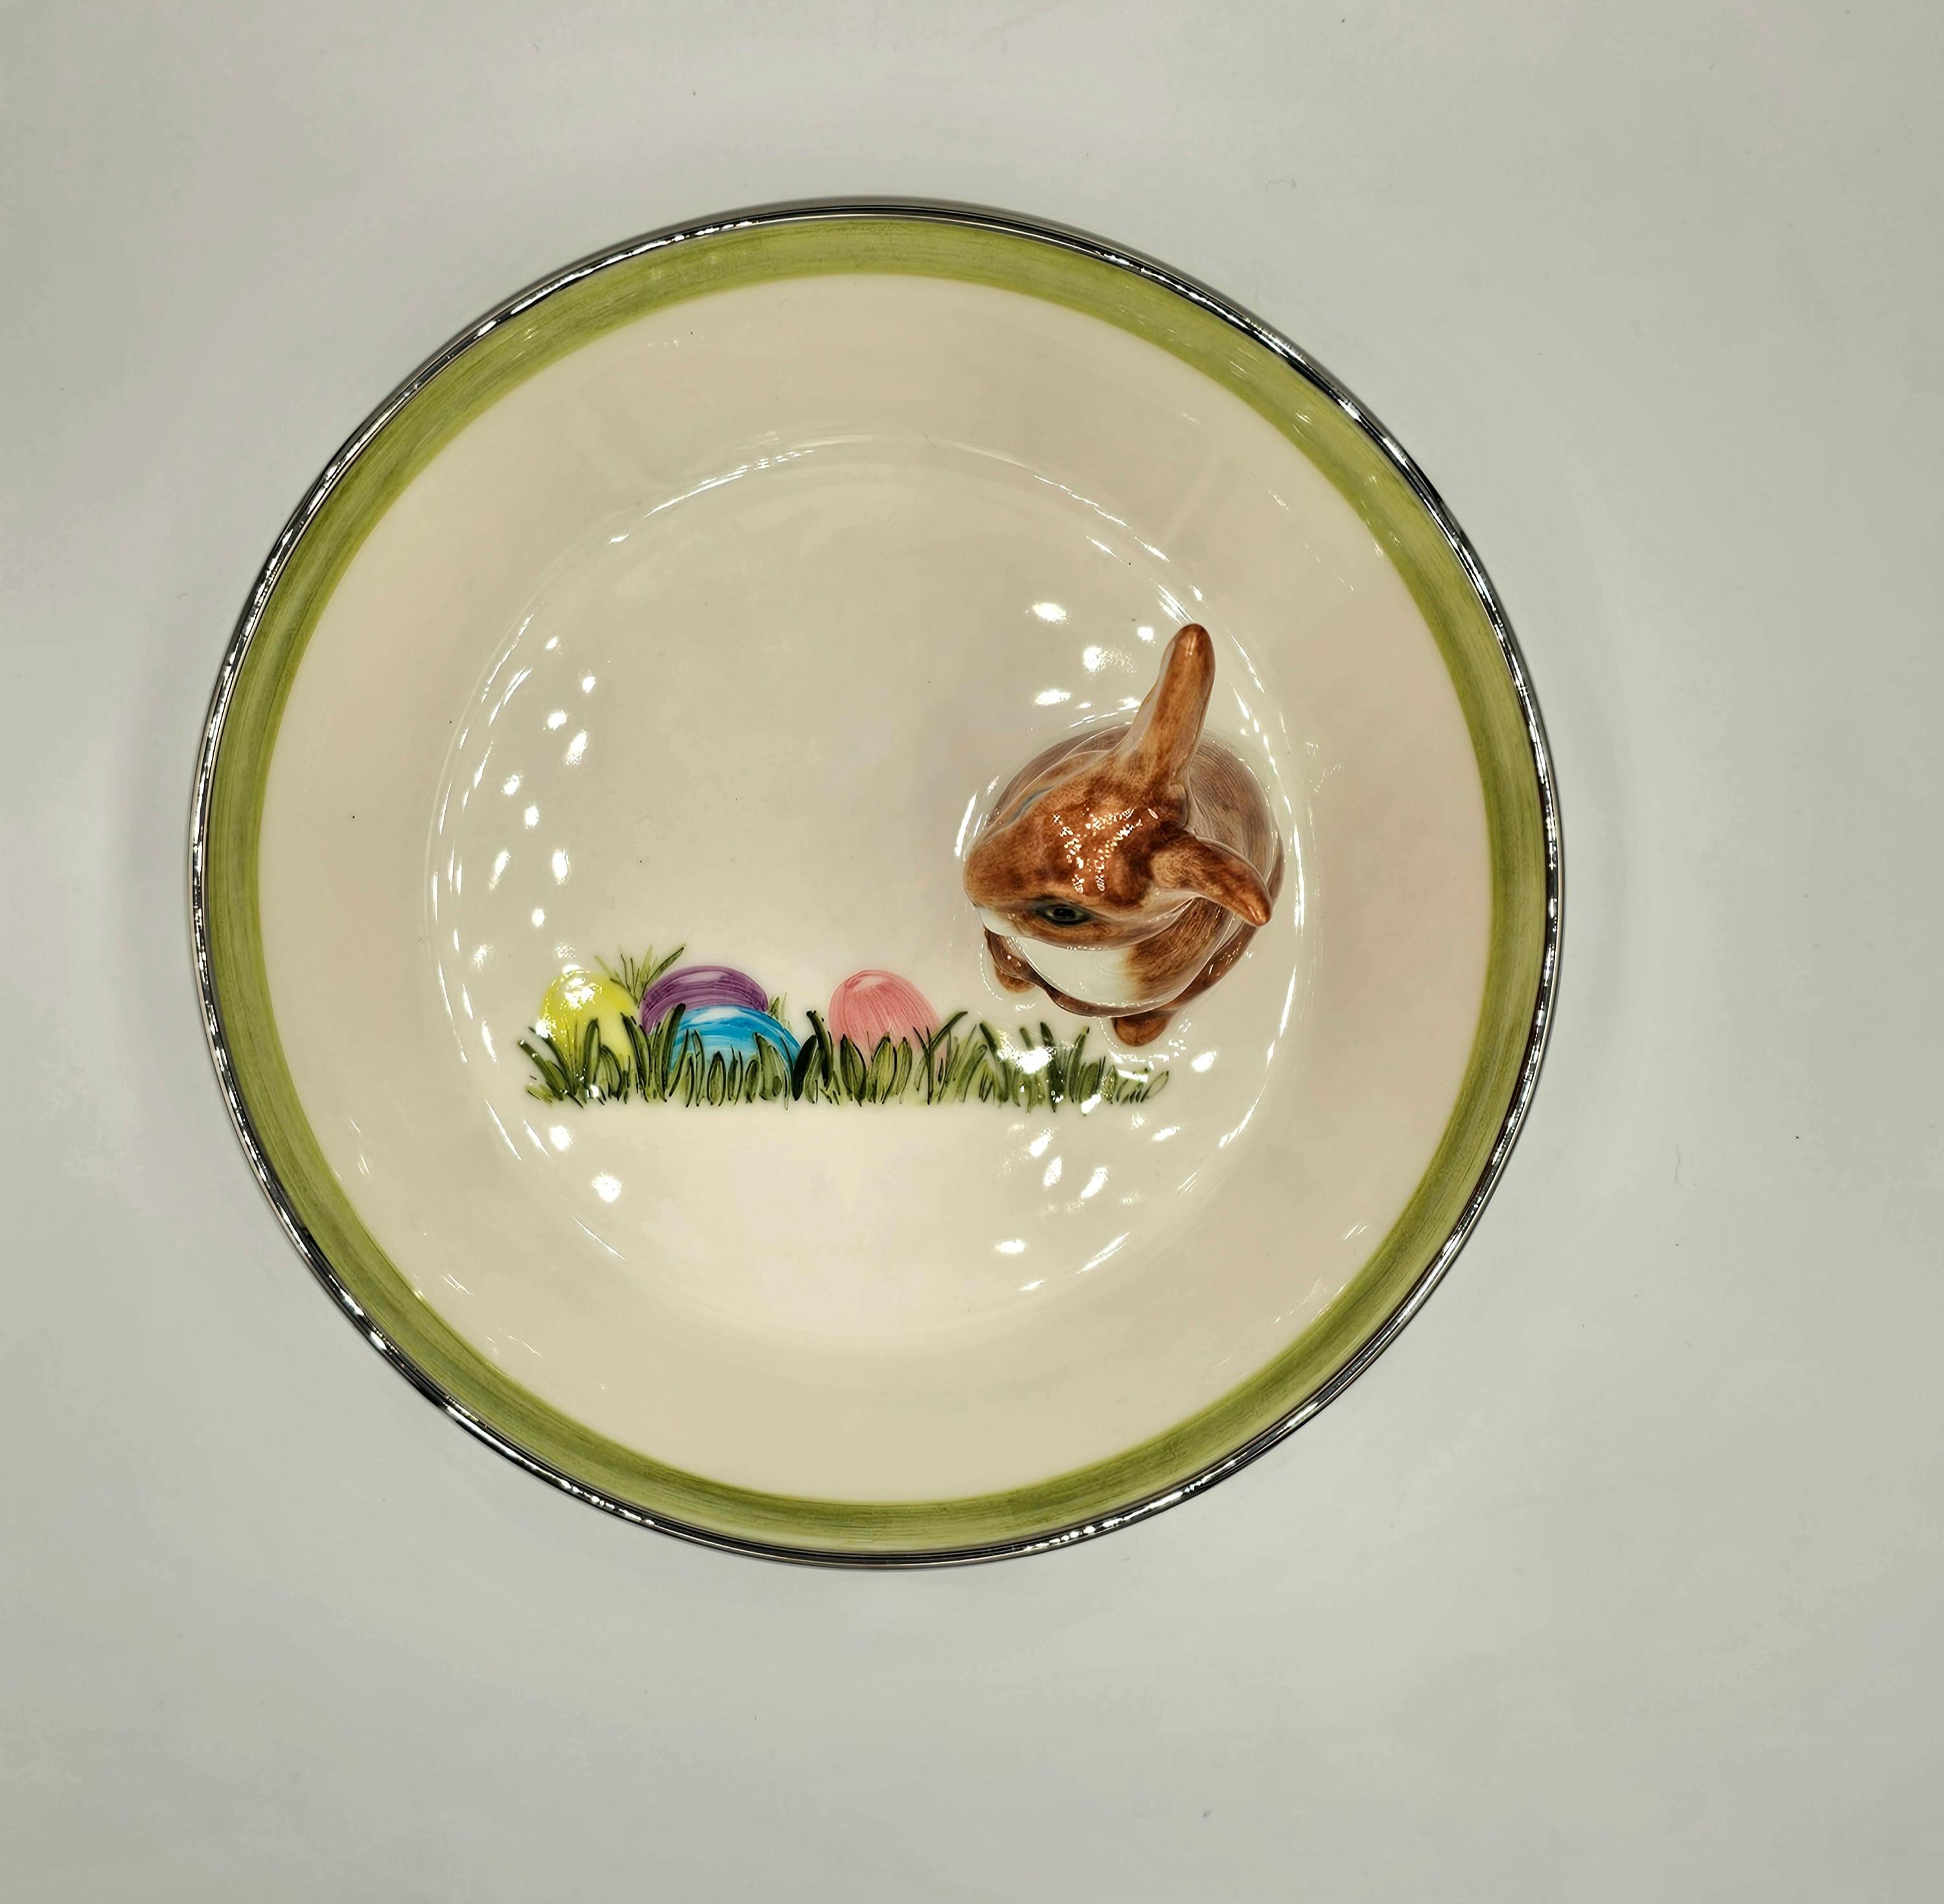 Completely handmade porcelain bowl with a hands-free naturalistic painted Easter hare figure with brown spots. The bunny is sitting on the side of the bowl for decorating nuts or sweets around.
The dish inside is handsfree painted with colorful